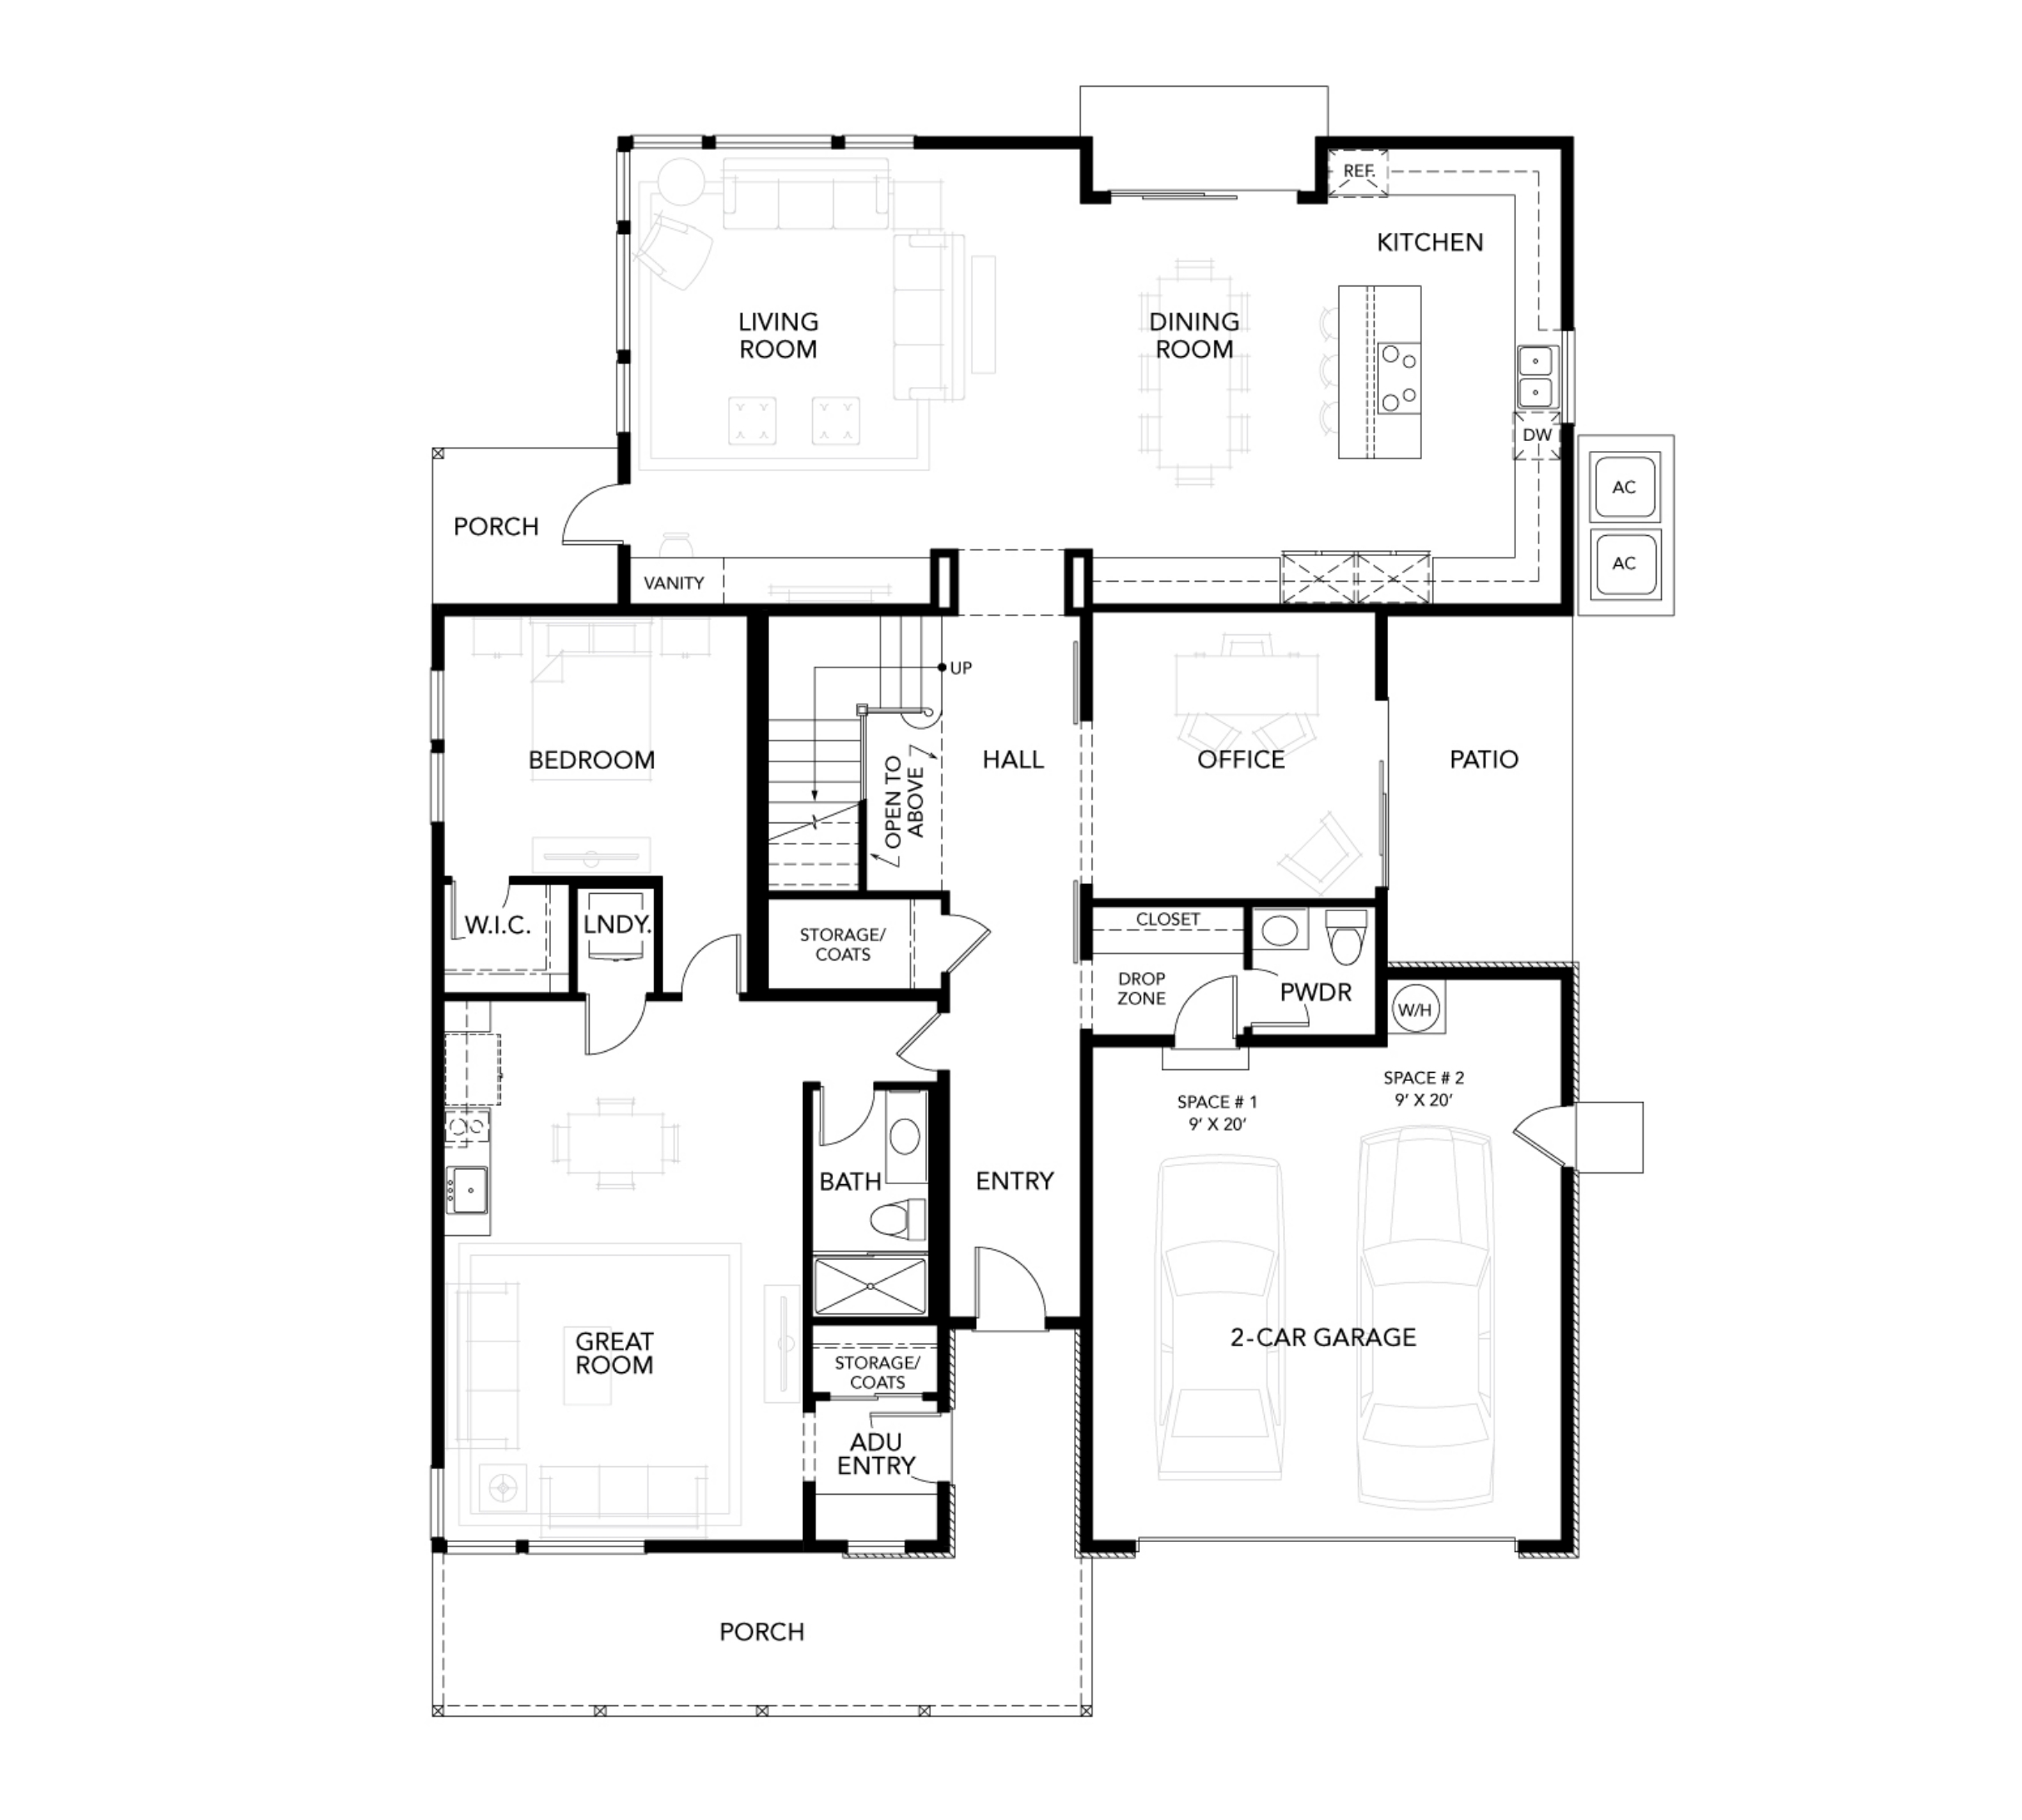 Haven Development's first floor Plan for elevation 4A of the Legacy at Lucas Valley new home development in Marin County, CA